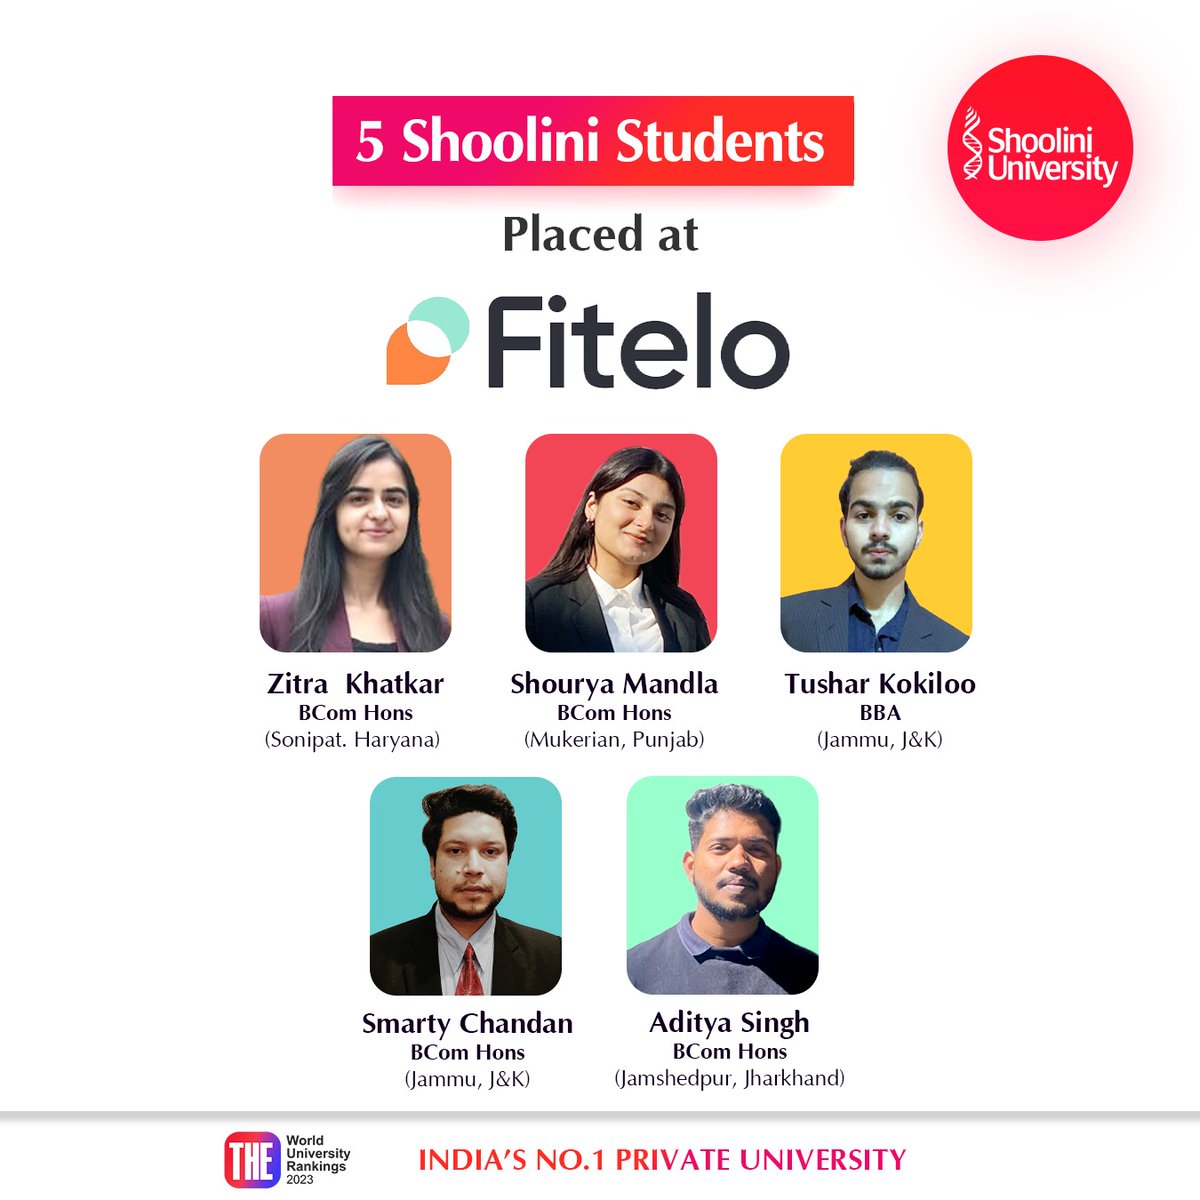 Placements on a Roll! 🙌🏼
Our students have taken their first step towards a successful career & we wish all of them the best for their future.

#placement #campusplacement2023 #fitelo #dieticians #fitnessexperts #dietitians #campusplacement #hiring #newhiring #ShooliniUniversity